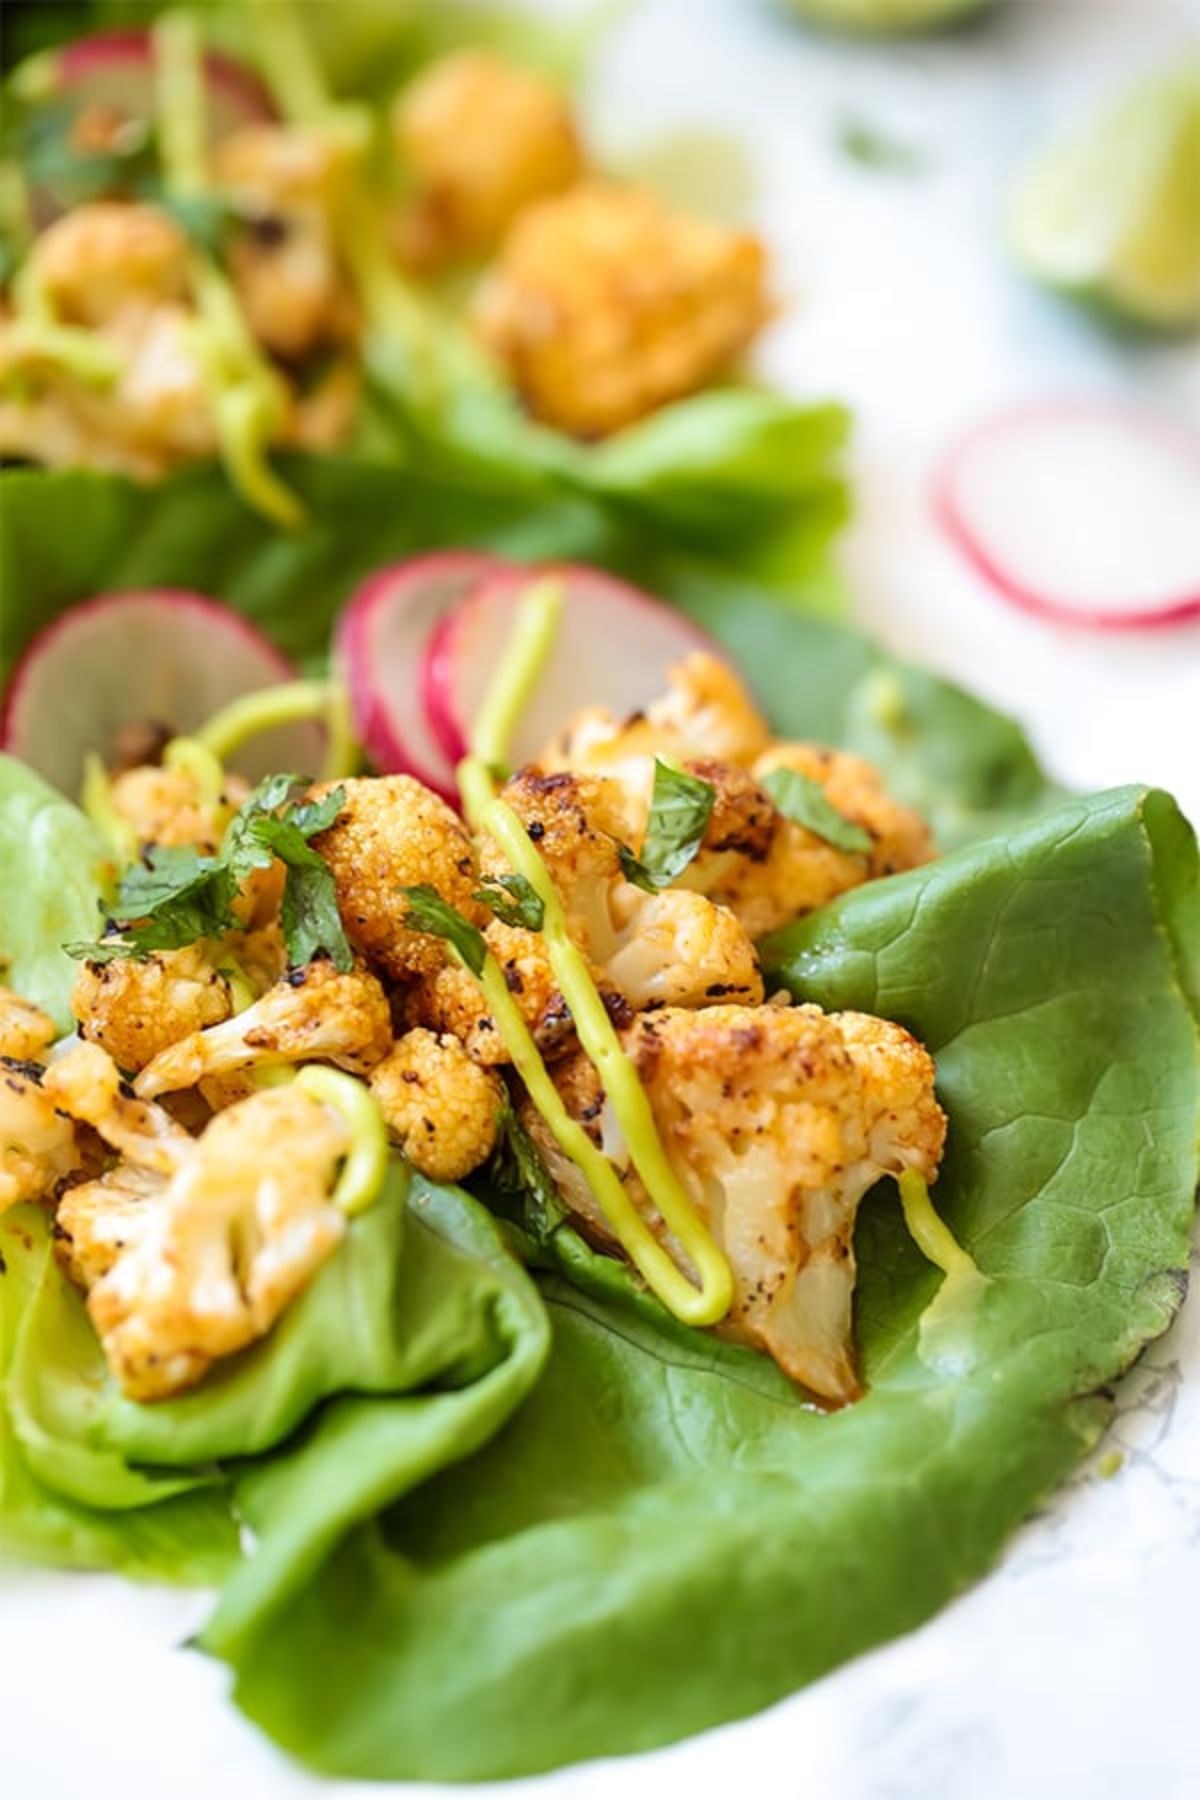 Lettuce leaves filled with bang bang cauliflower and sliced radish